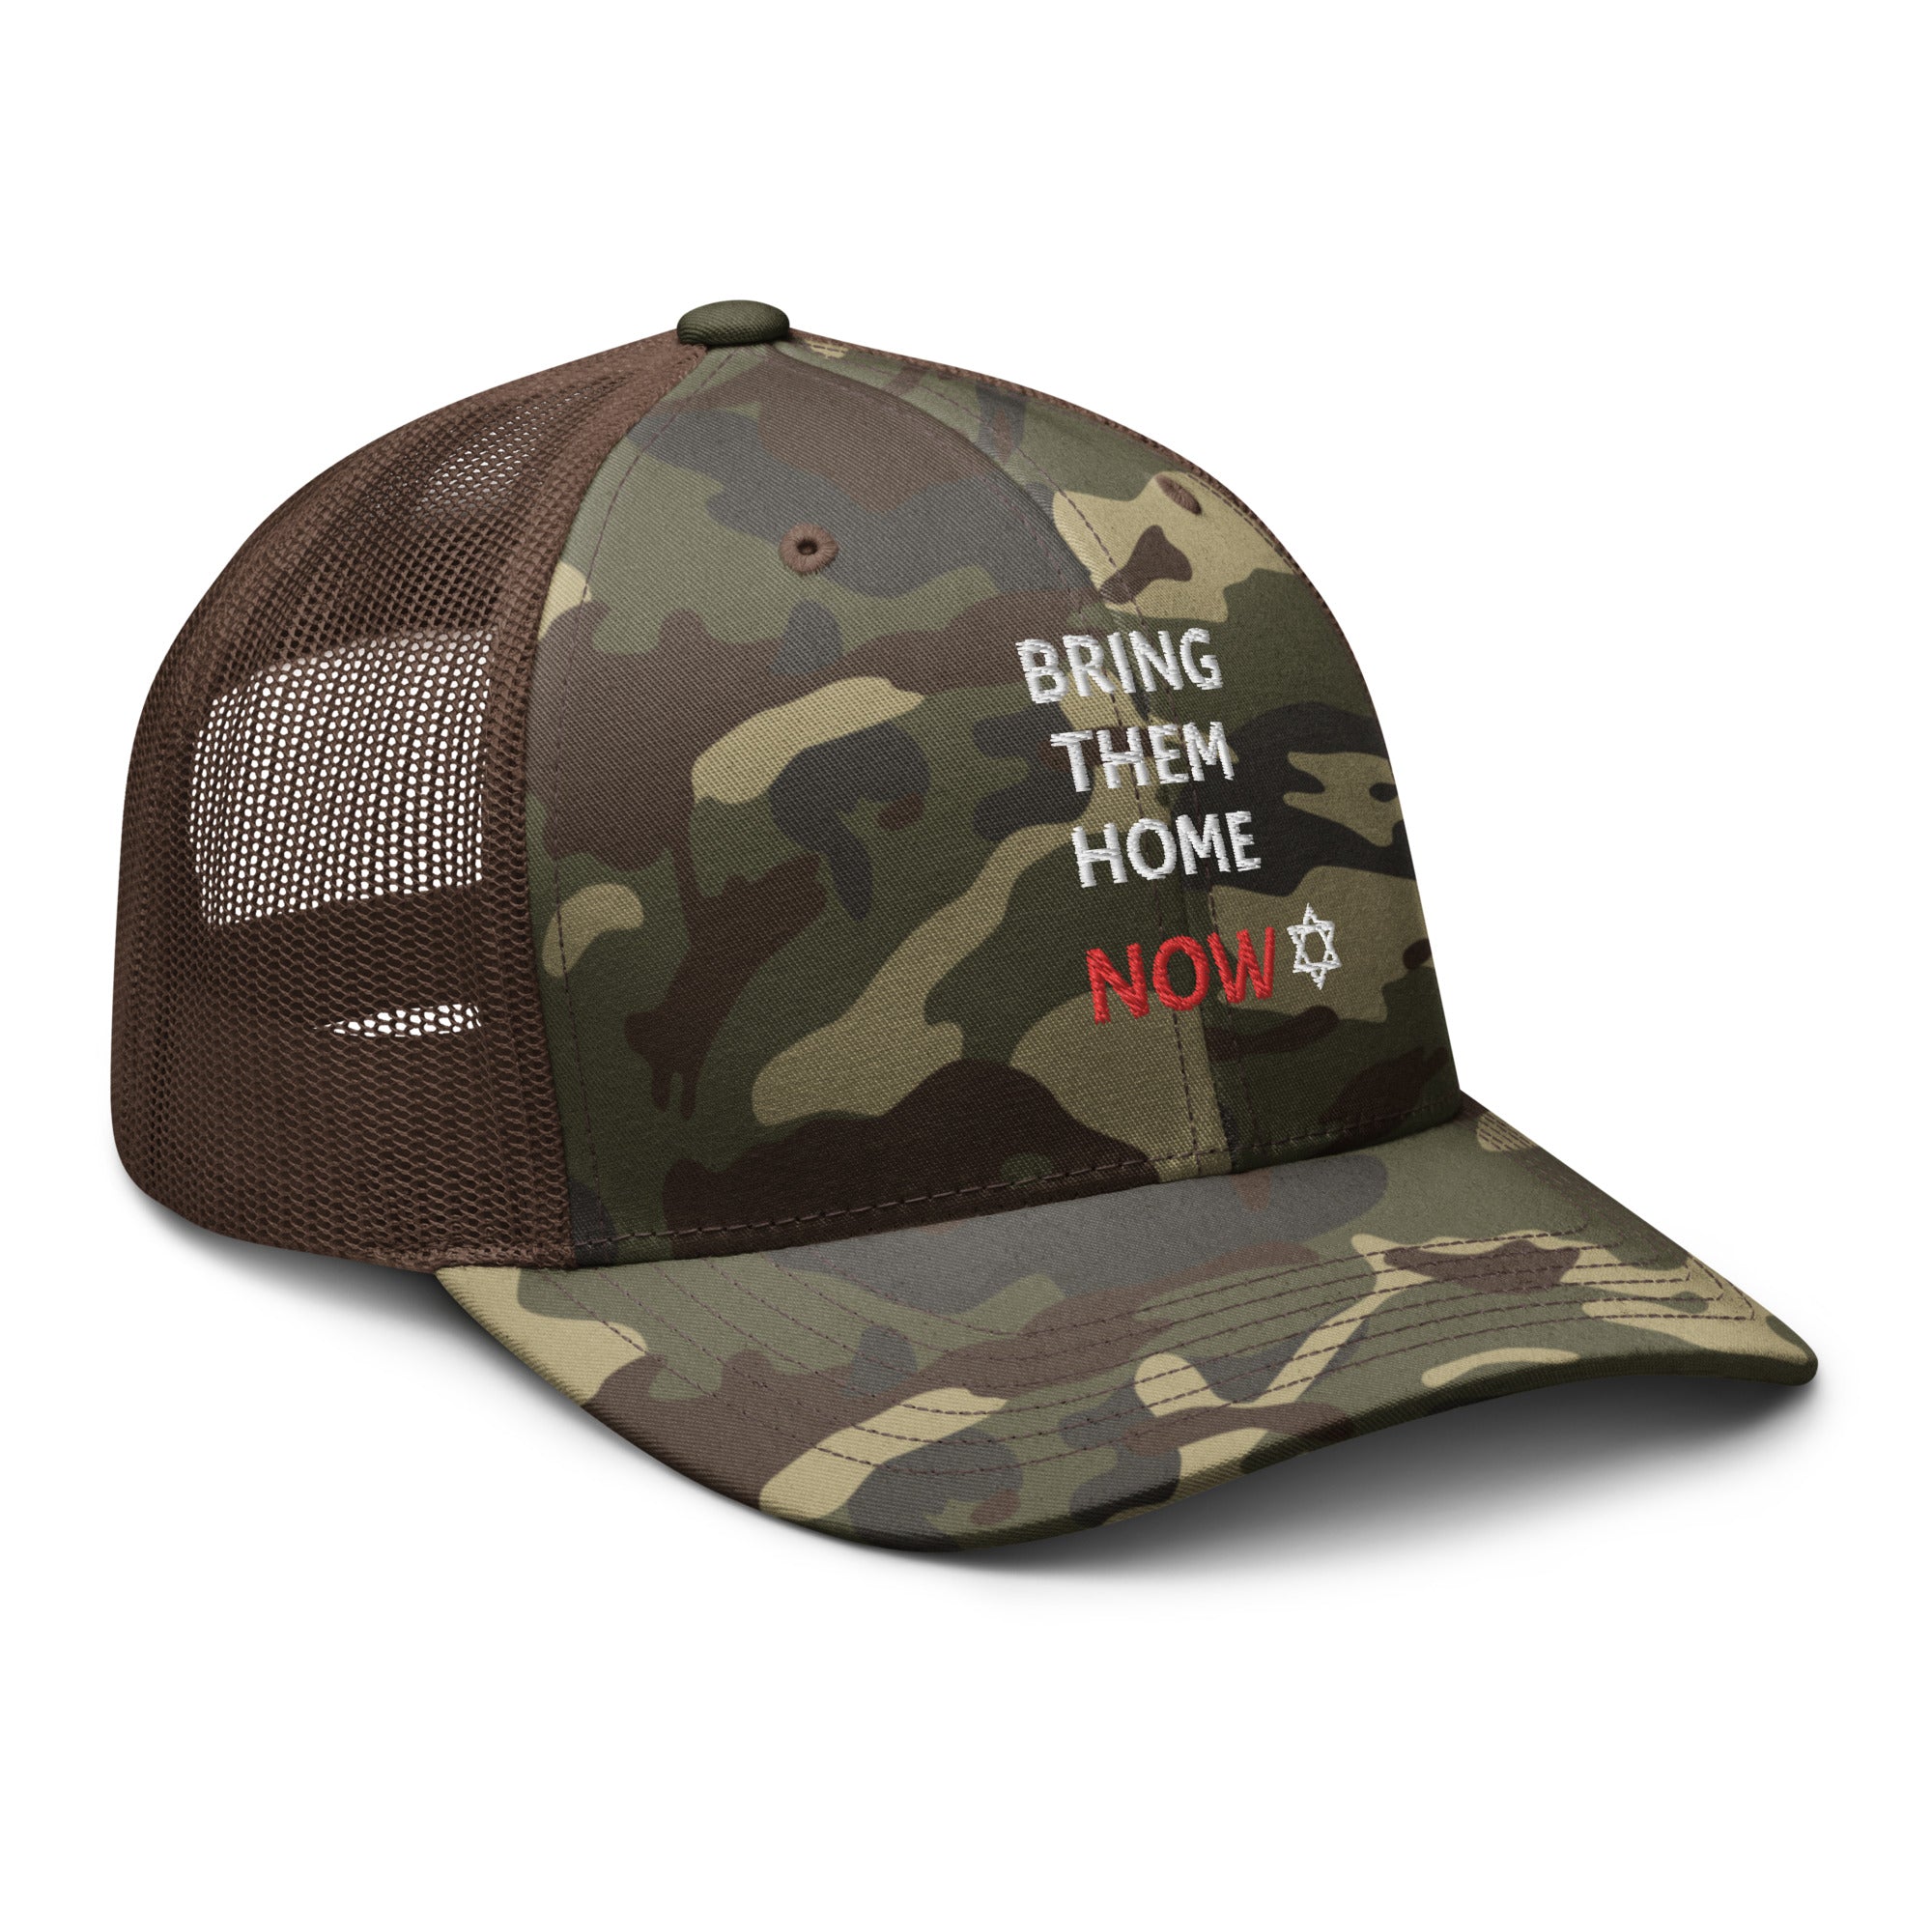 Bring Them Home Now - Camouflage trucker hat